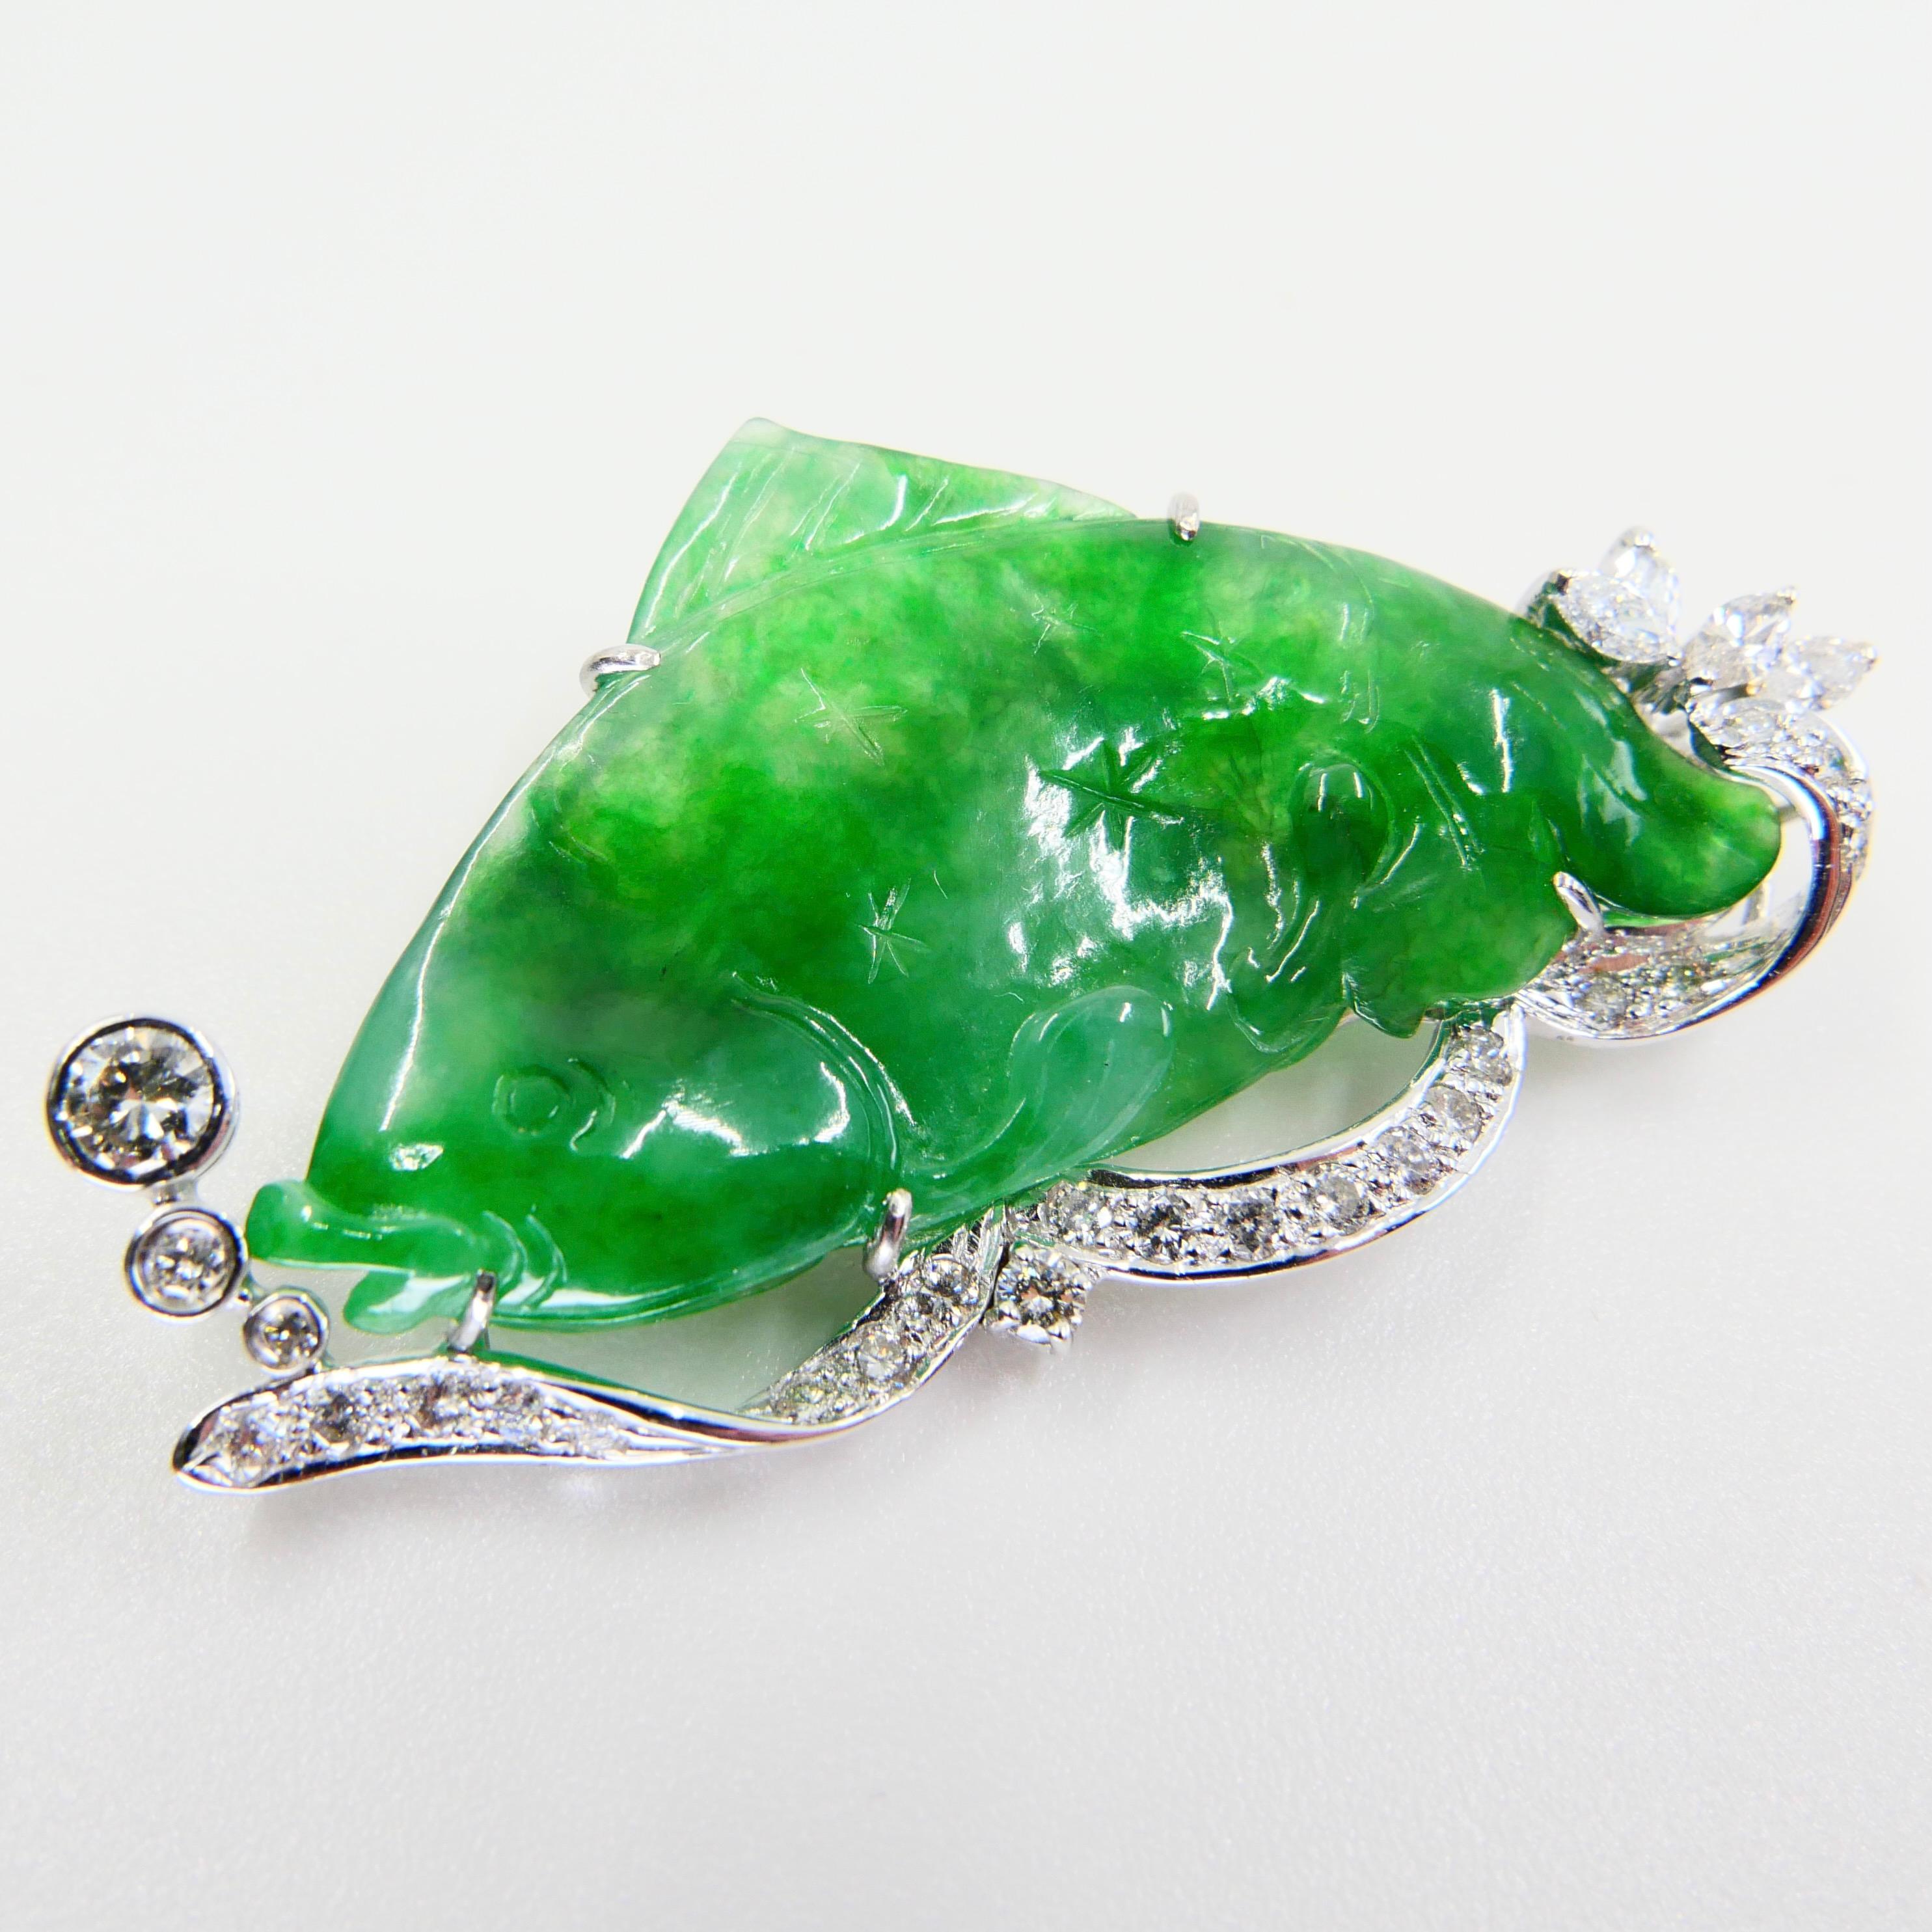 Women's Certified Apple Green Carved Fish Jade & Diamond Brooch, Symbolizes Wealth For Sale